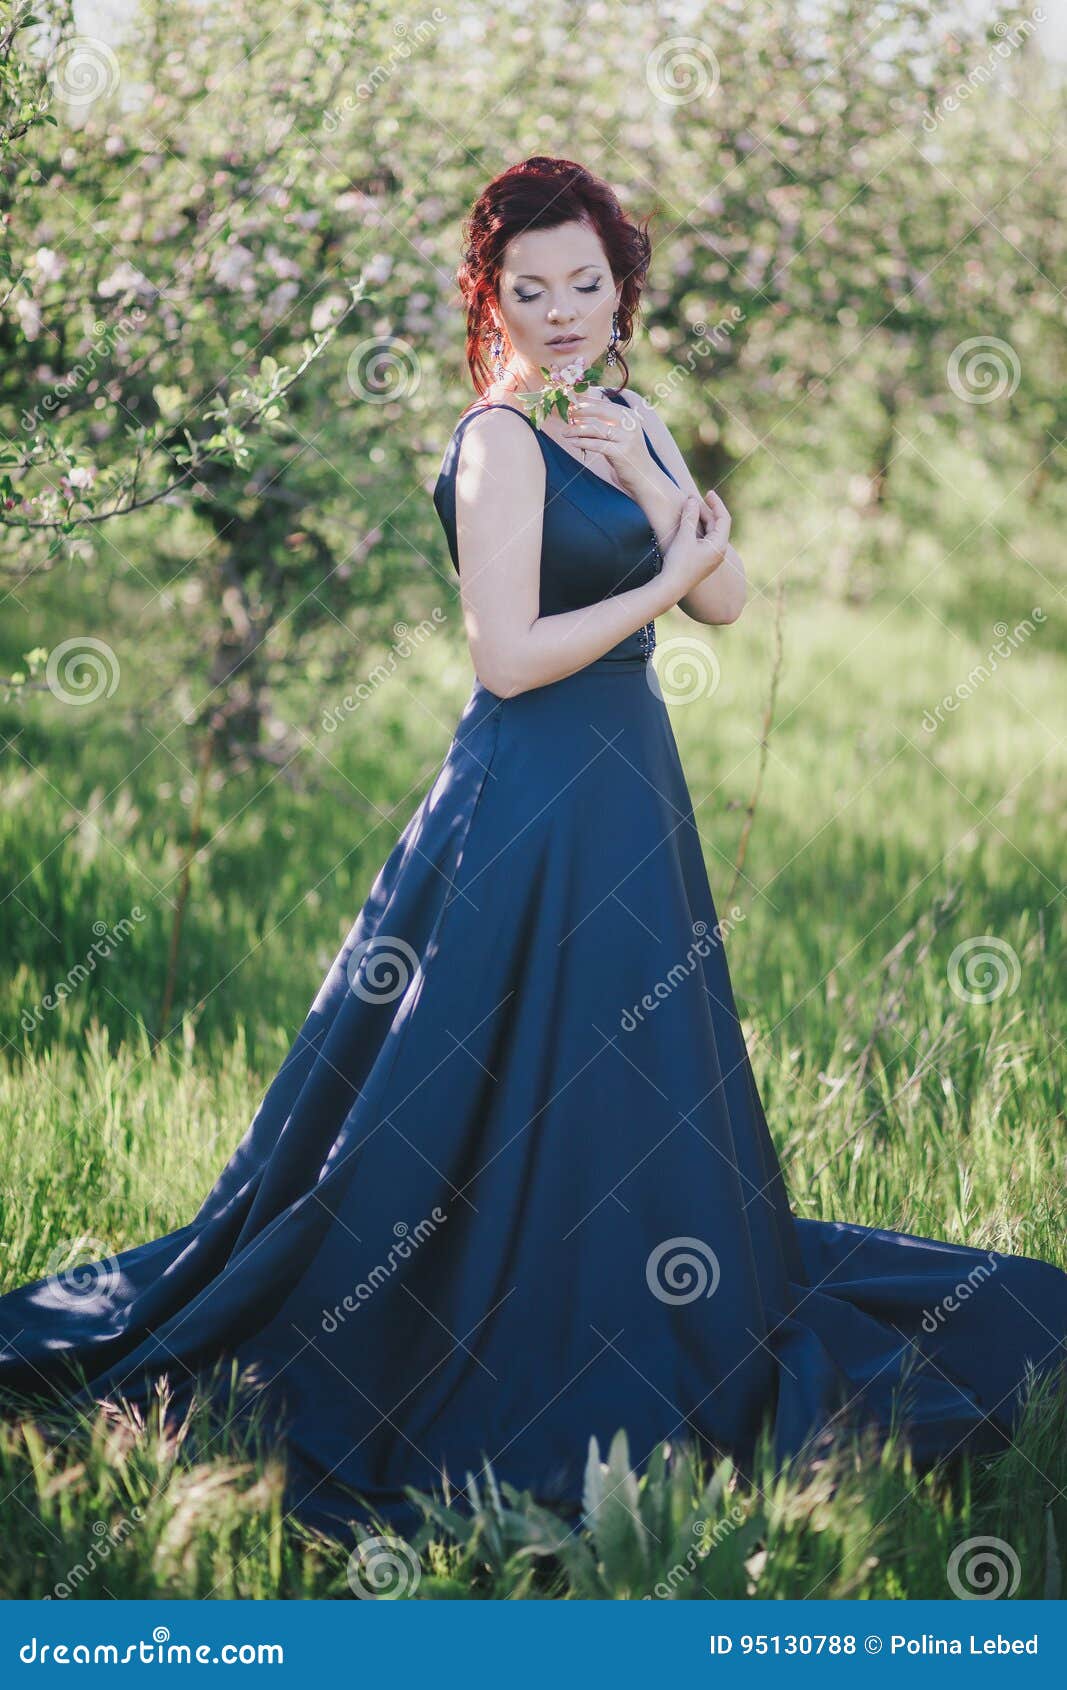 Young Beautiful Woman with Red Hair in a Blue Dress Posing in a ...